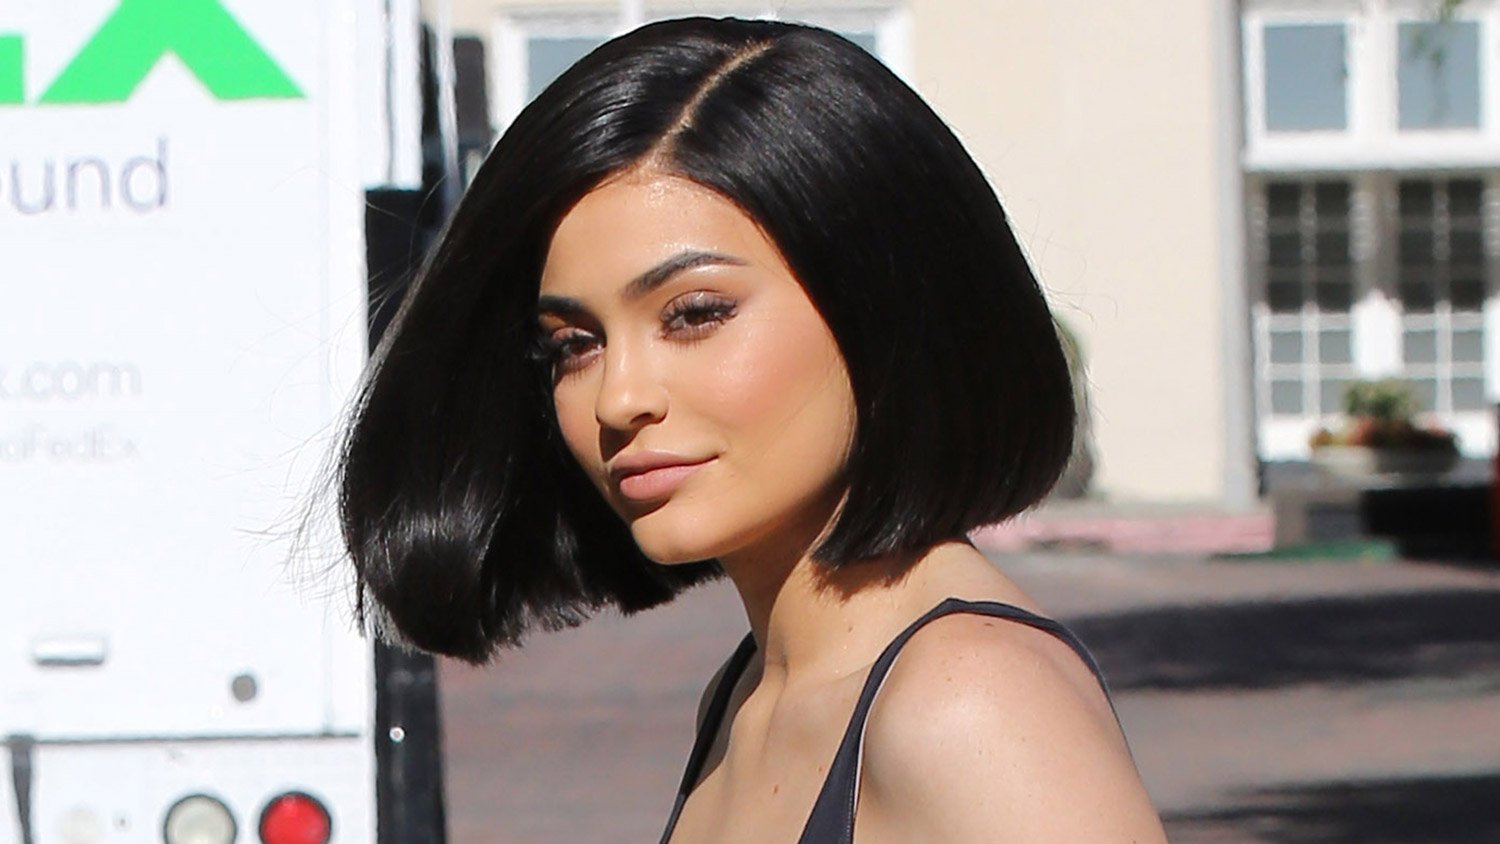 Kylie Jenner Debuts Her New Short Haircut Kris Jenner Kylie Jenner Just Jared